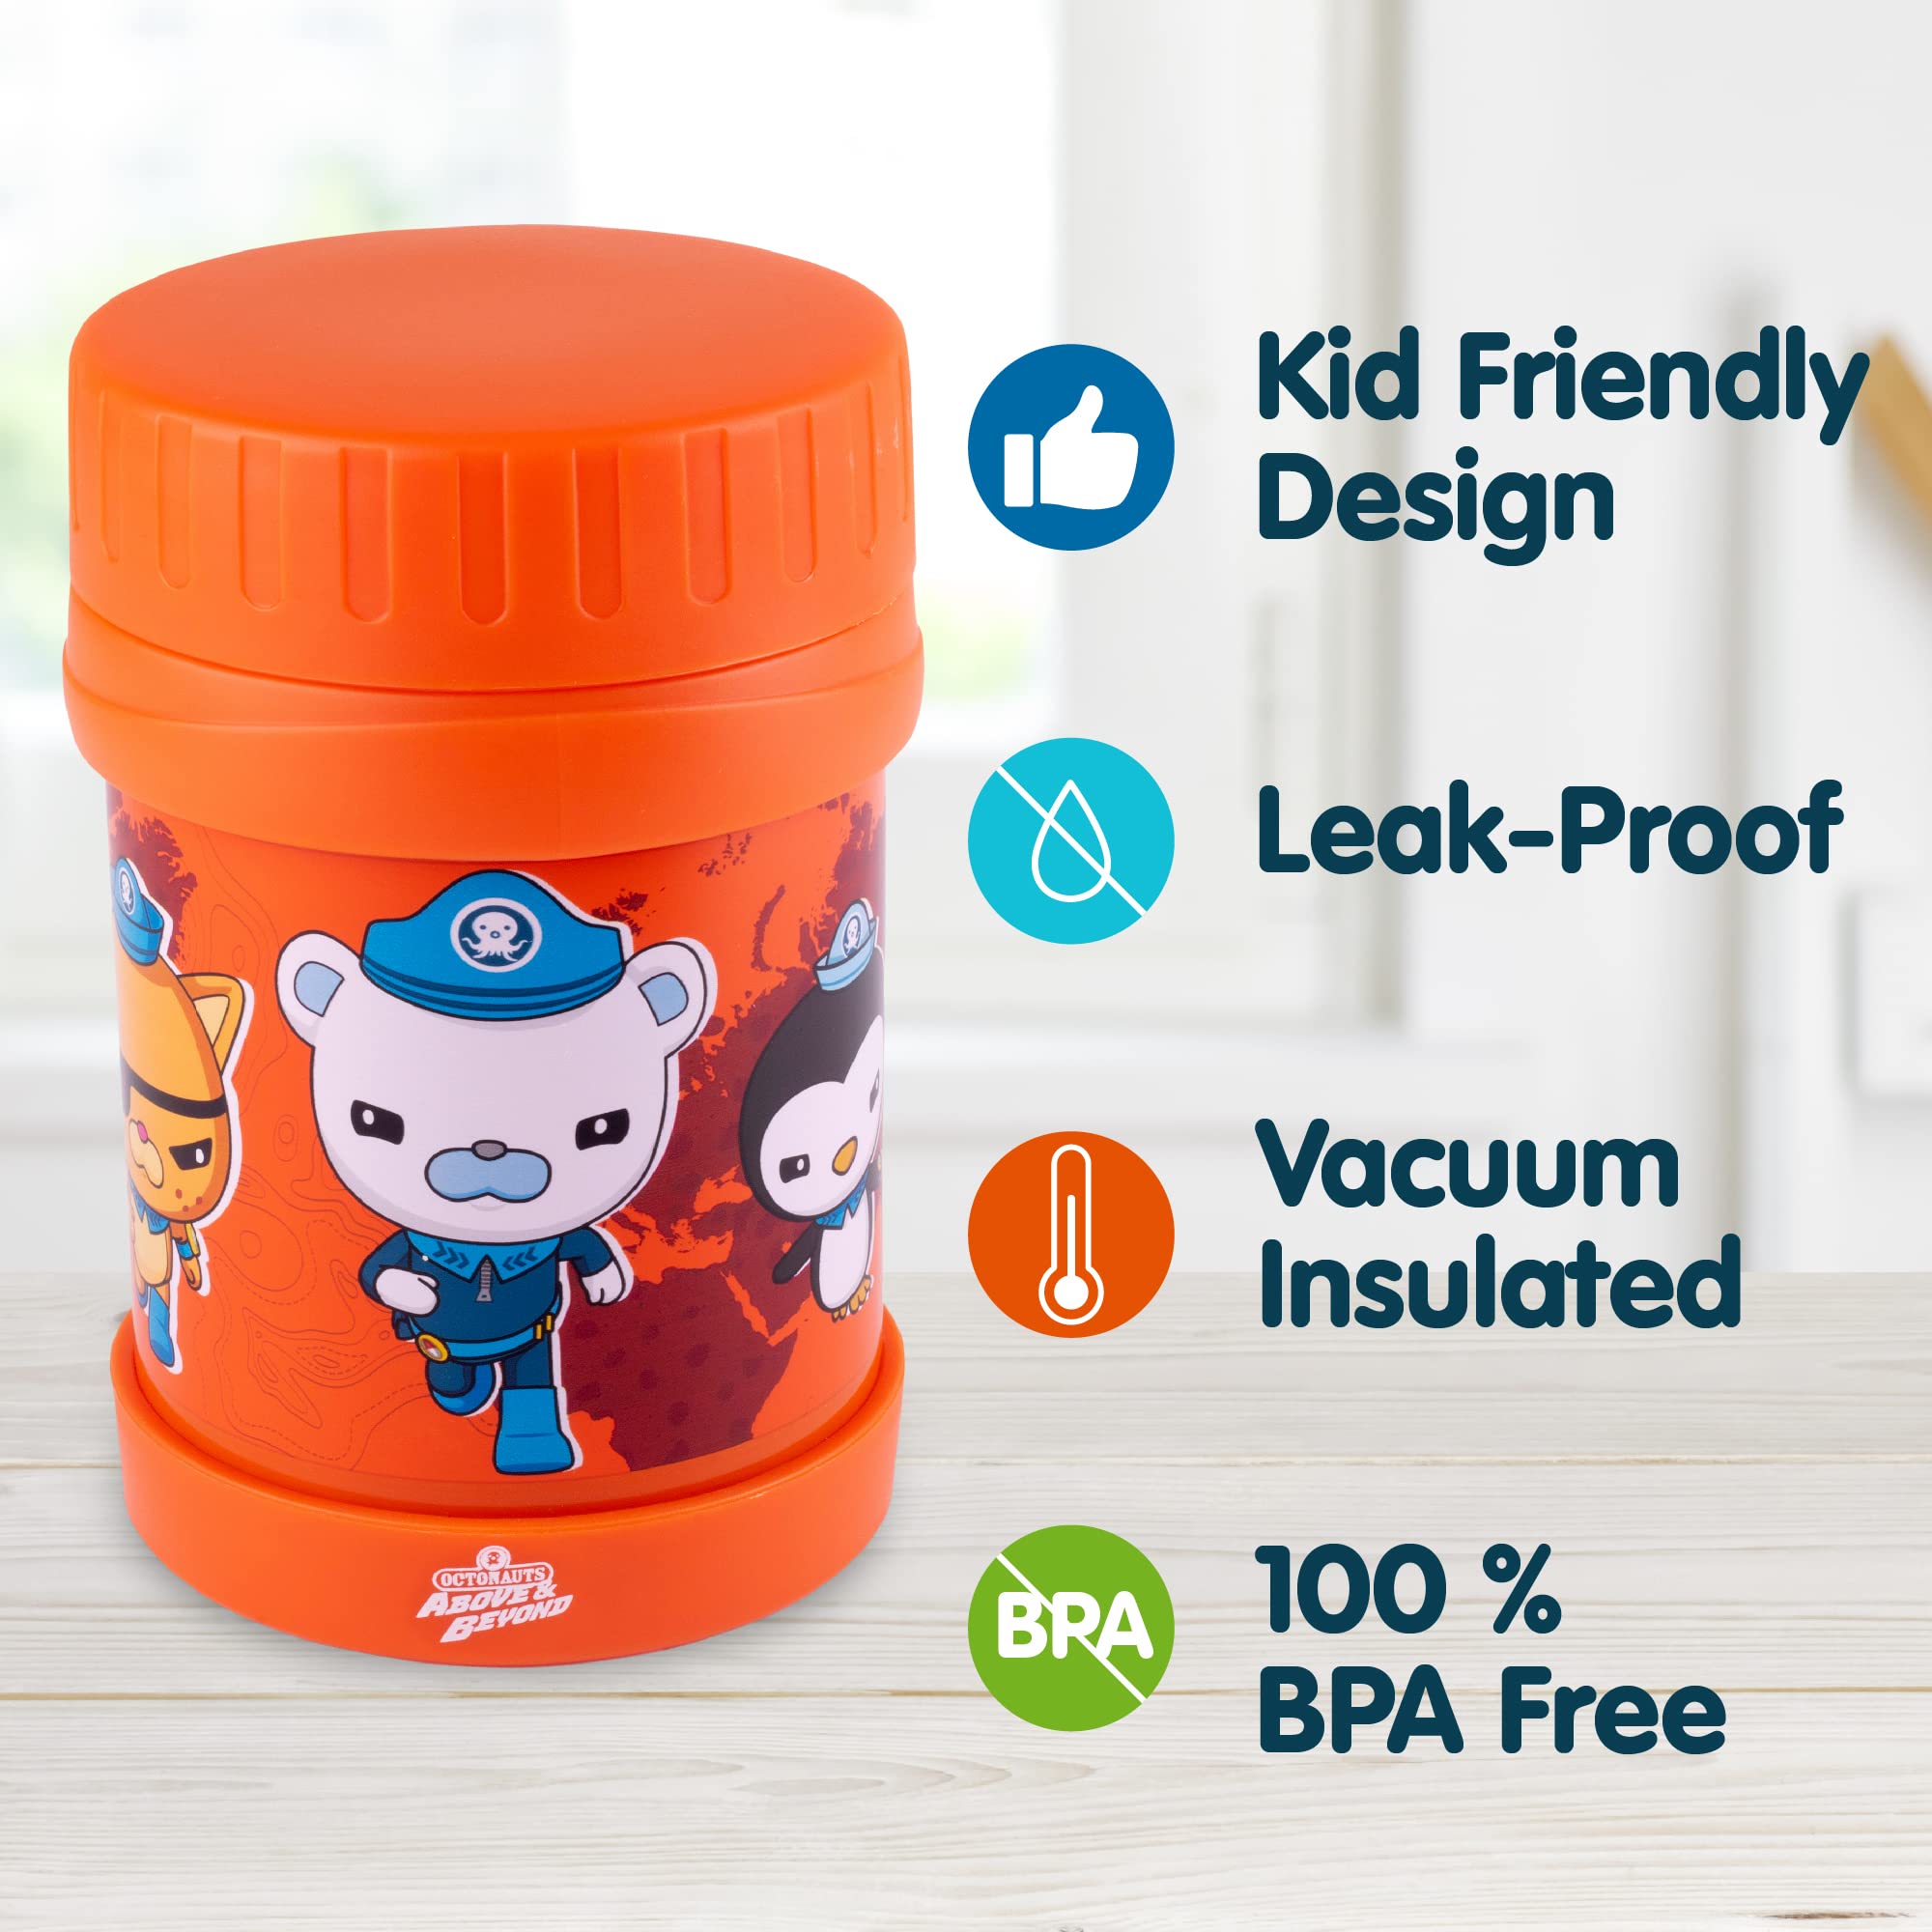 Octonauts Above & Beyond Stainless Steel Vacuum Insulated 13 oz Food Jar for Kids, Orange - Leak-Proof Container Keeps Meals, Liquids, Soups Hot or Cold for Hours - Lunch Boxes & Bags Back to School